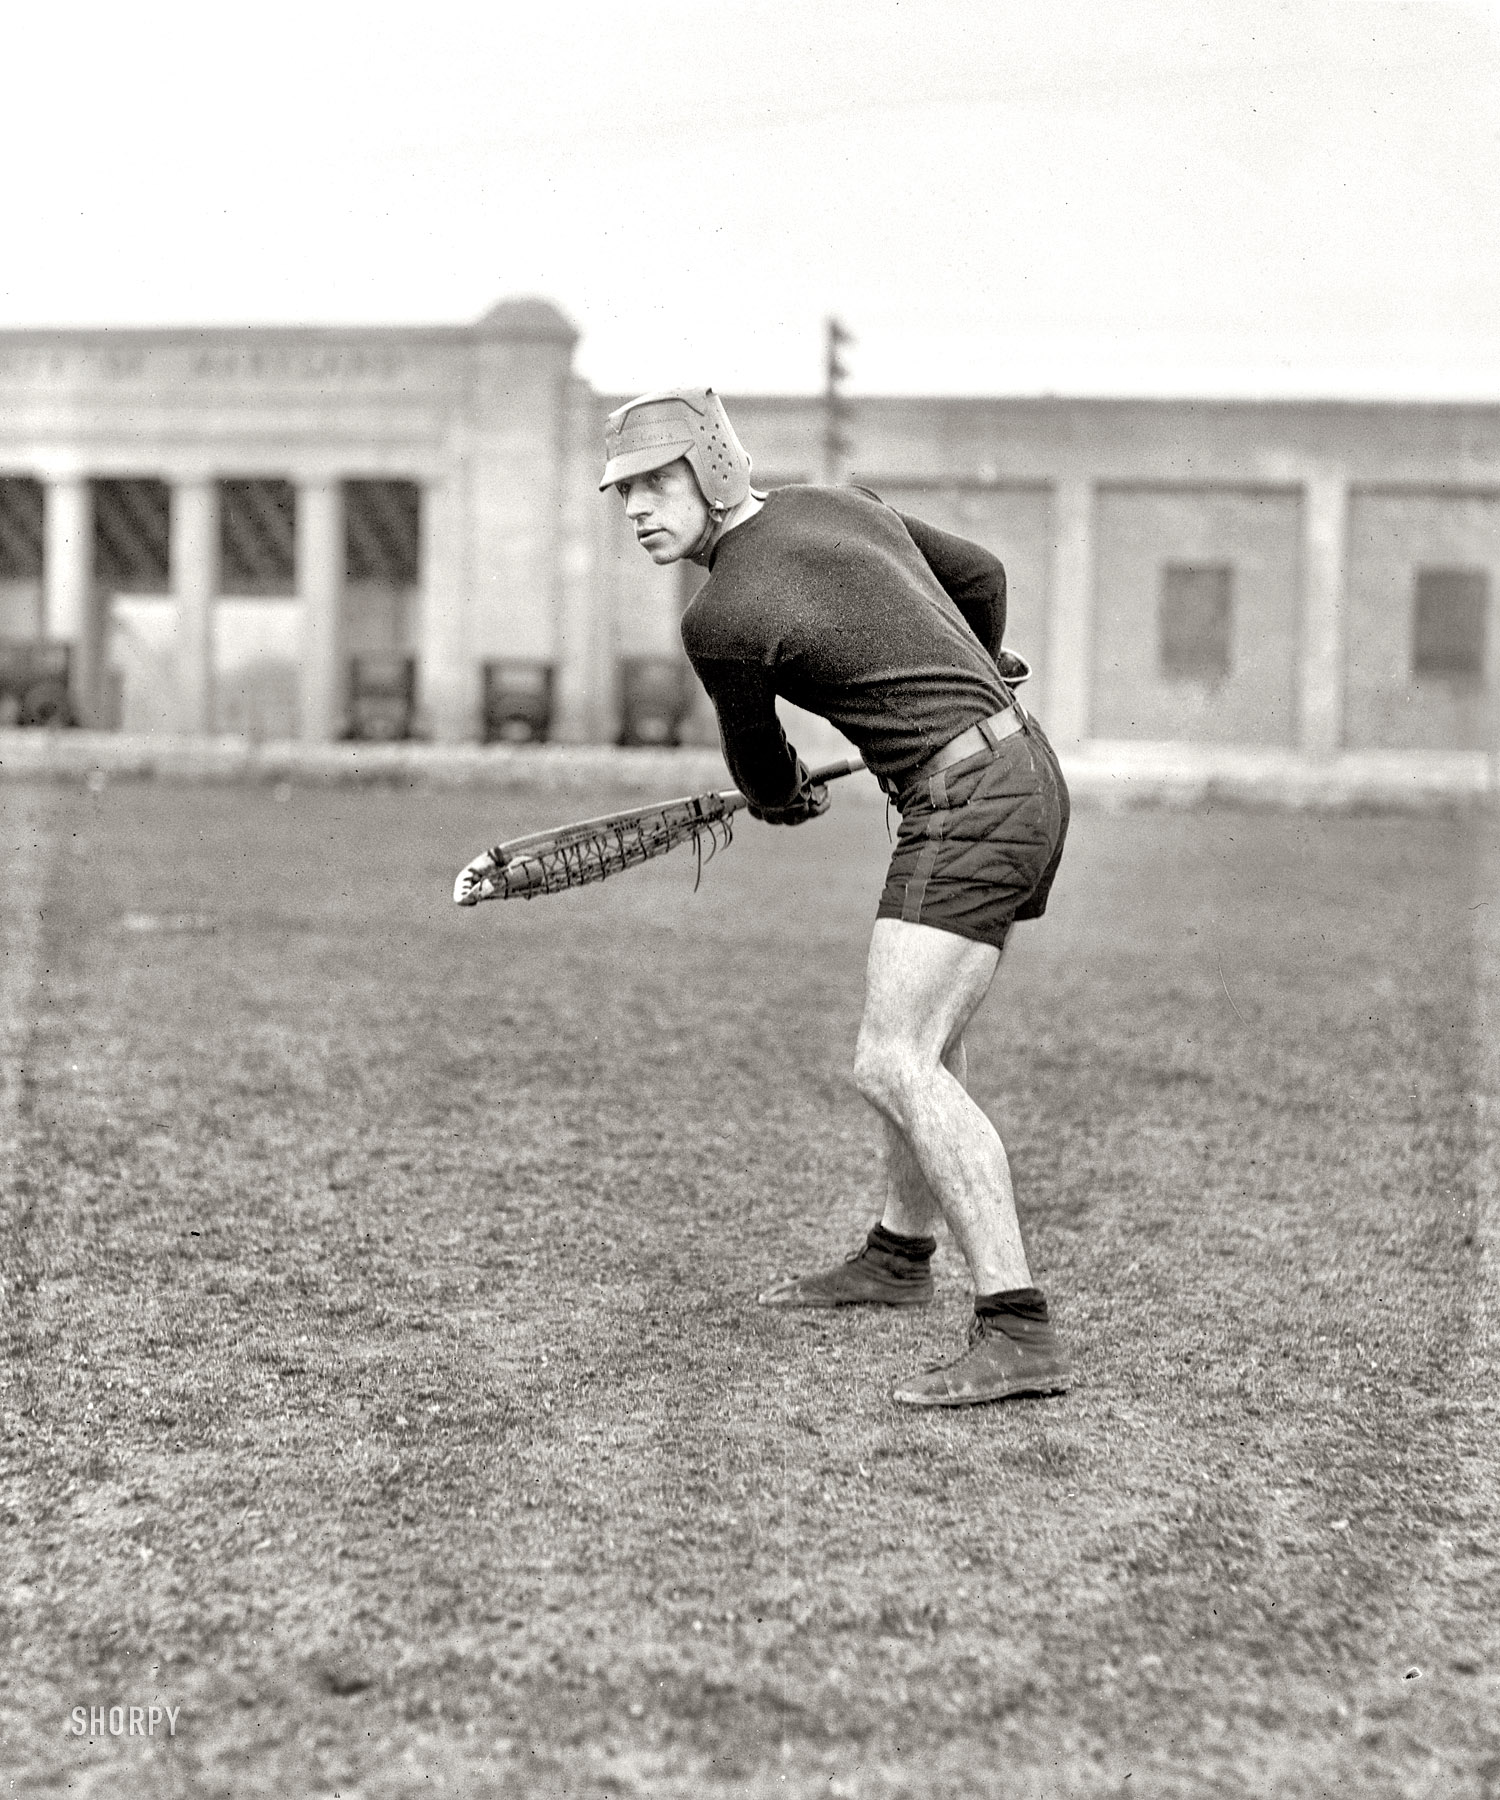 1924. "Lewis, Maryland Agricultural College." Gomer Lewis, University of Maryland lacrosse star. National Photo Co. glass negative. View full size.